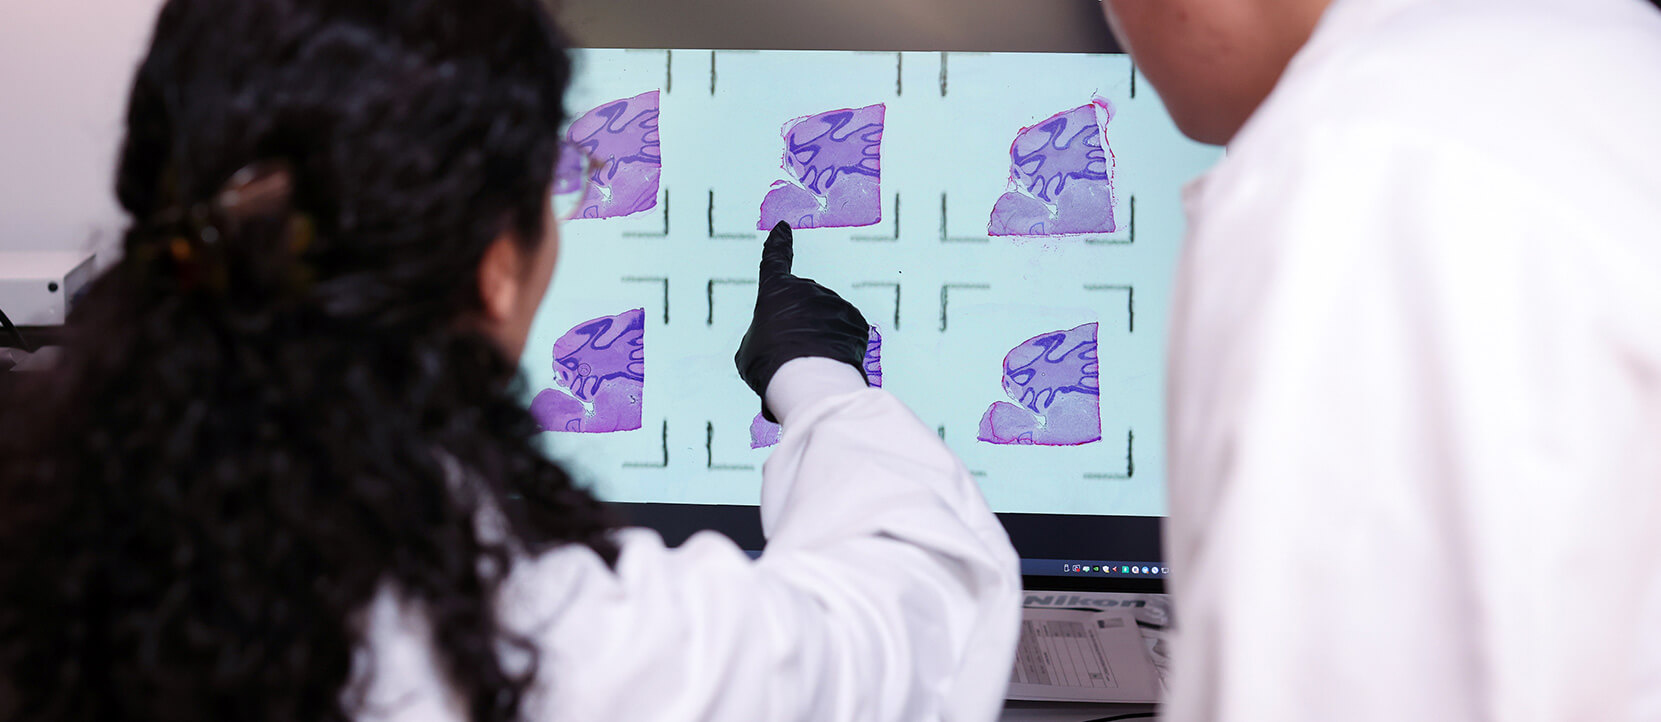 A scientist points at slide sections on a screen which are dyed purple